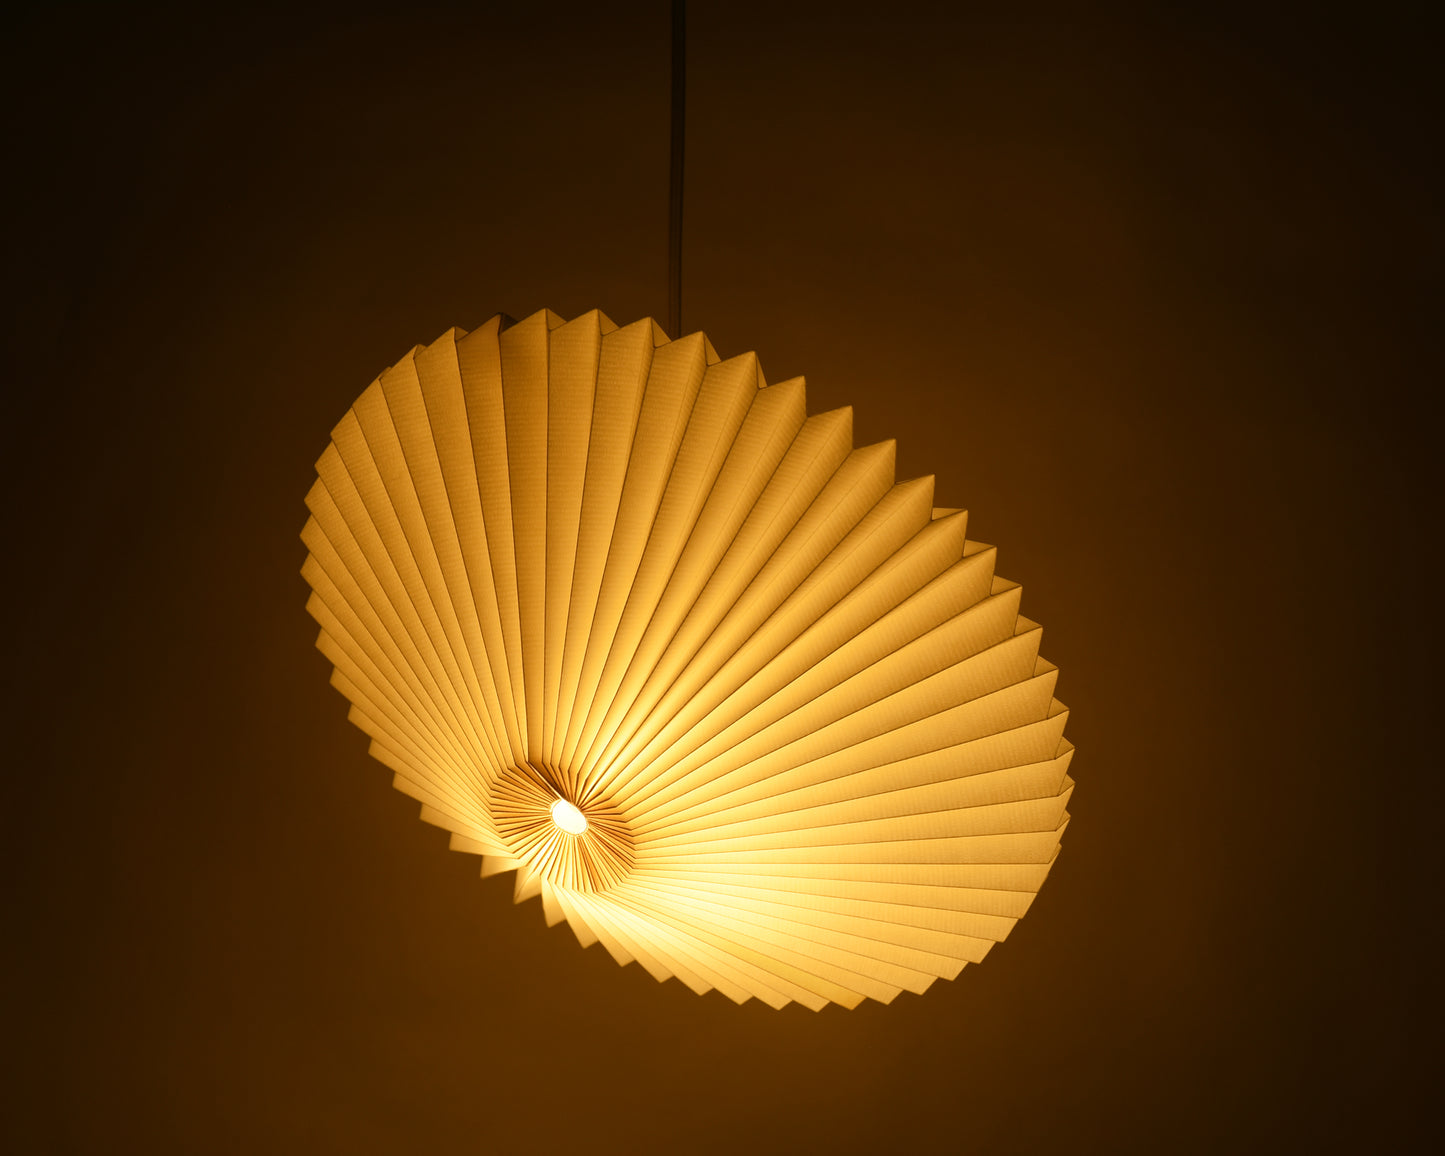 Handcrafted white origami paper lamp in the shape of a flying saucer, featuring delicate pleats and casting a warm, mood-lighting glow.